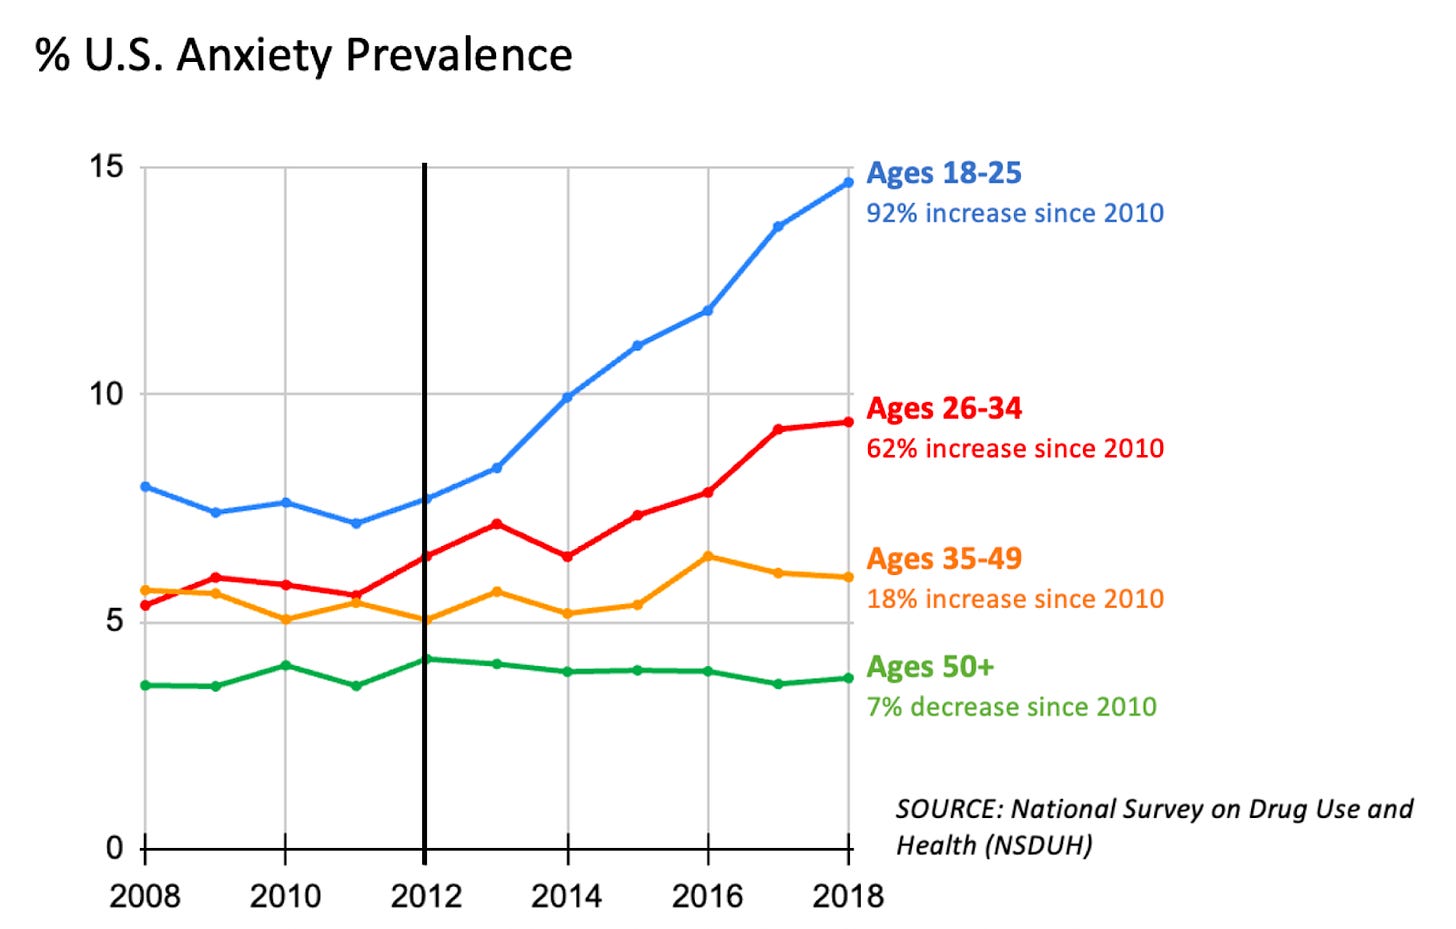 % U.S.A Anxiety Prevalence. 92% Increase for those between 18-25 since 2010.